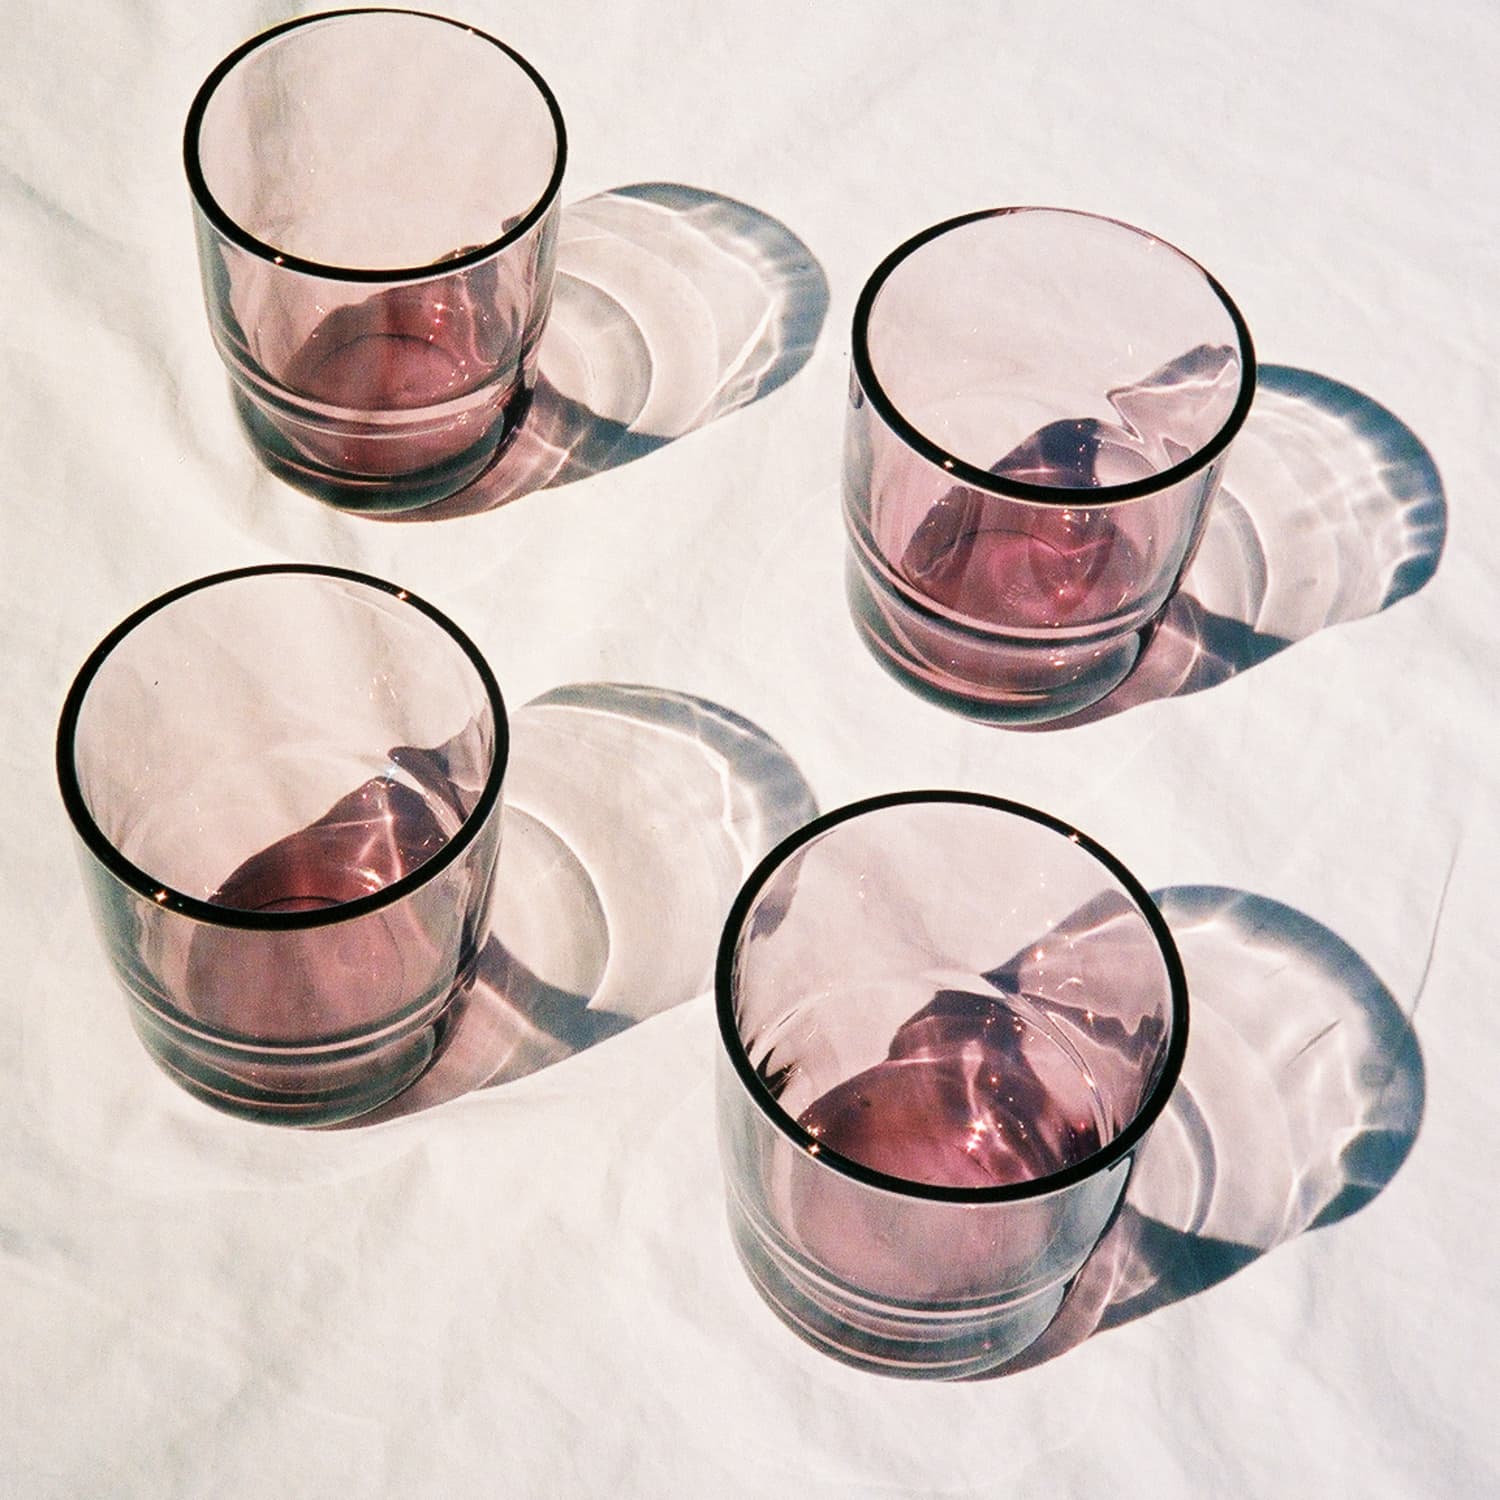 https://cdn.apartmenttherapy.info/image/upload/f_jpg,q_auto:eco,c_fill,g_auto,w_1500,ar_1:1/Our_Place_Drinking_Glasses